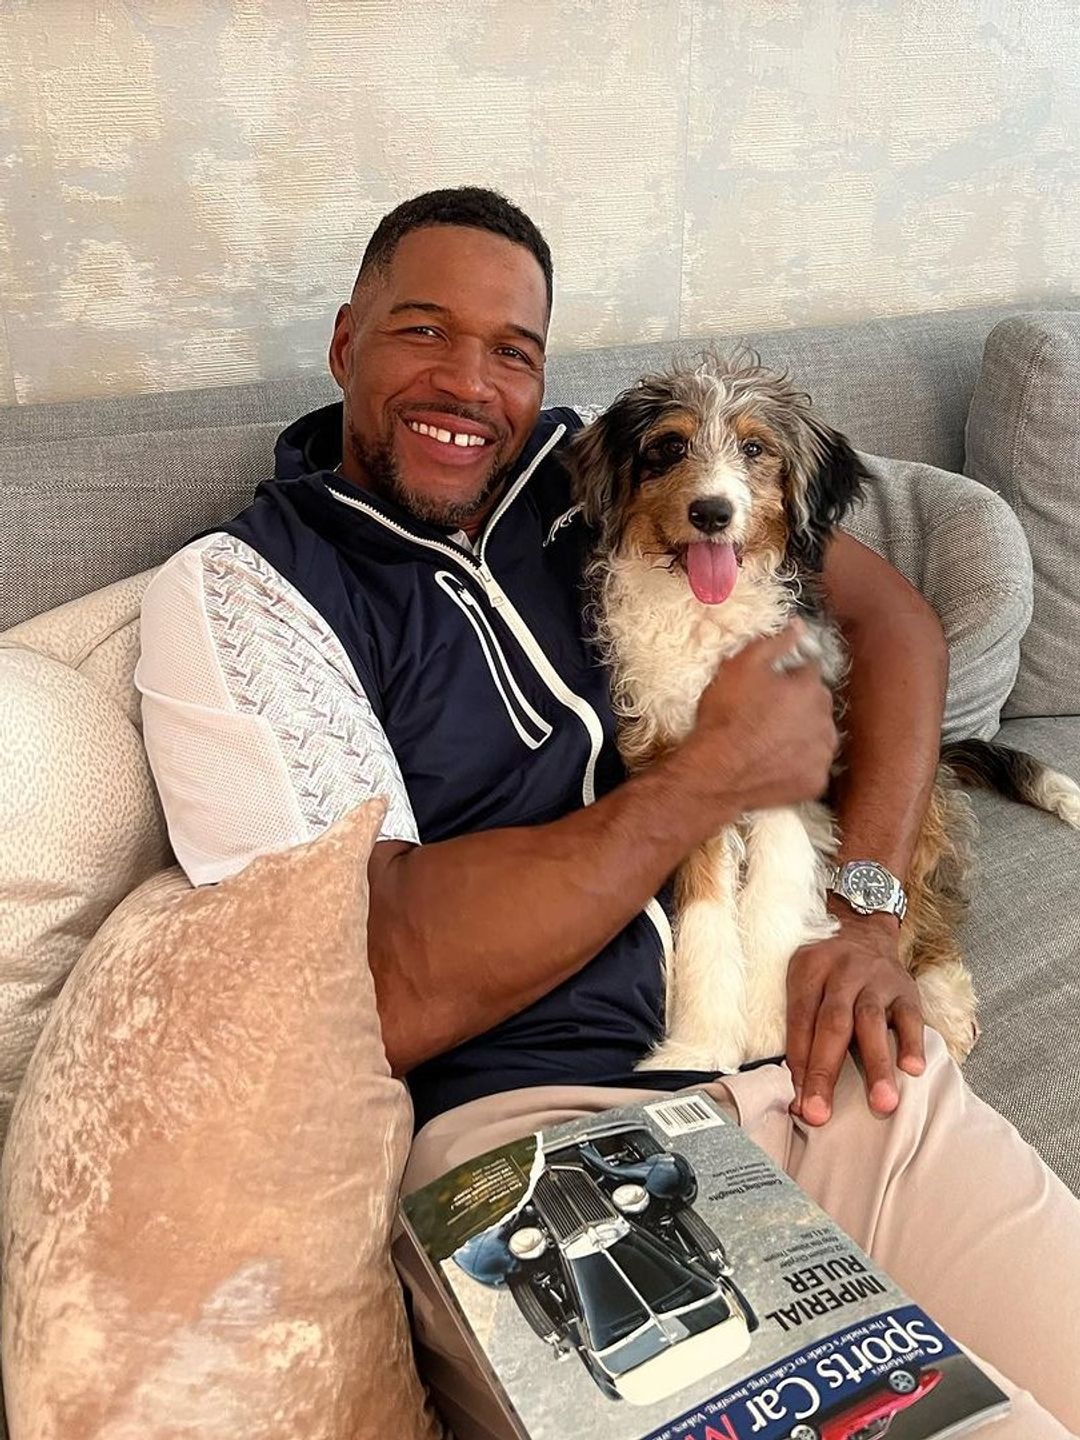 Michael Strahan sat smiling on a couch cradling his pet dog Zuma, also smiling, at his side